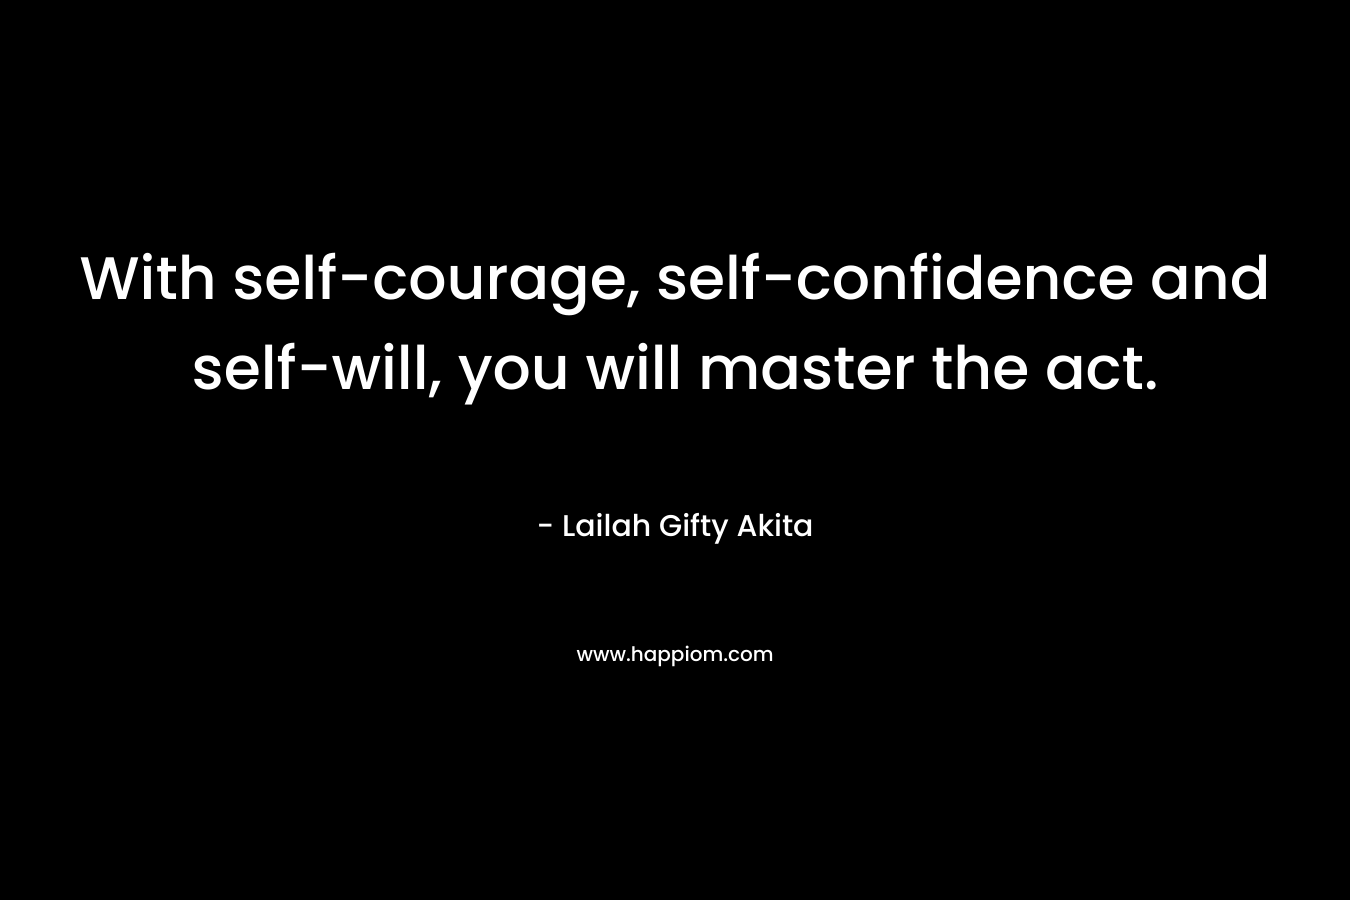 With self-courage, self-confidence and self-will, you will master the act.